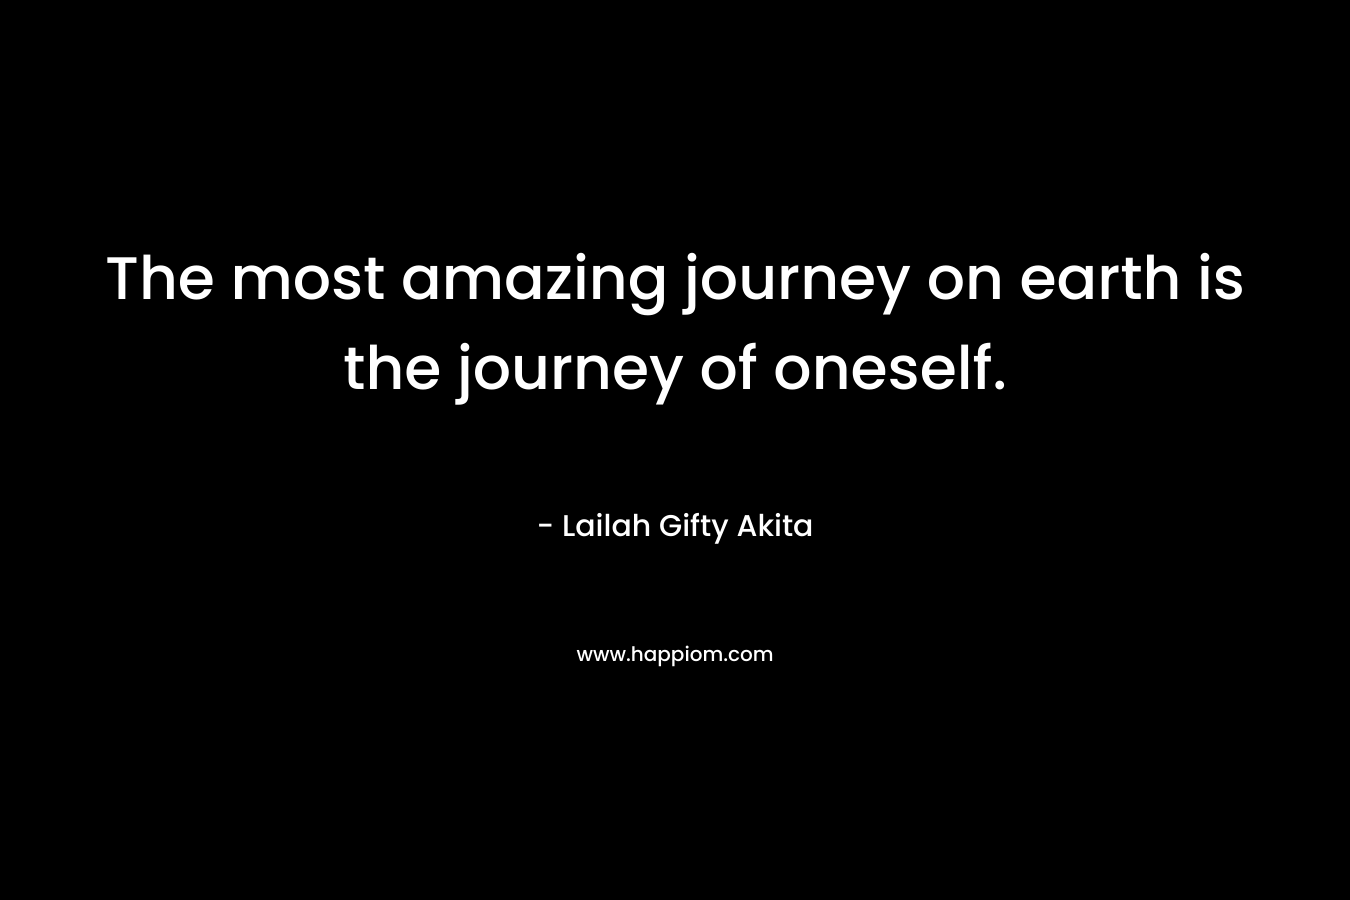 The most amazing journey on earth is the journey of oneself.